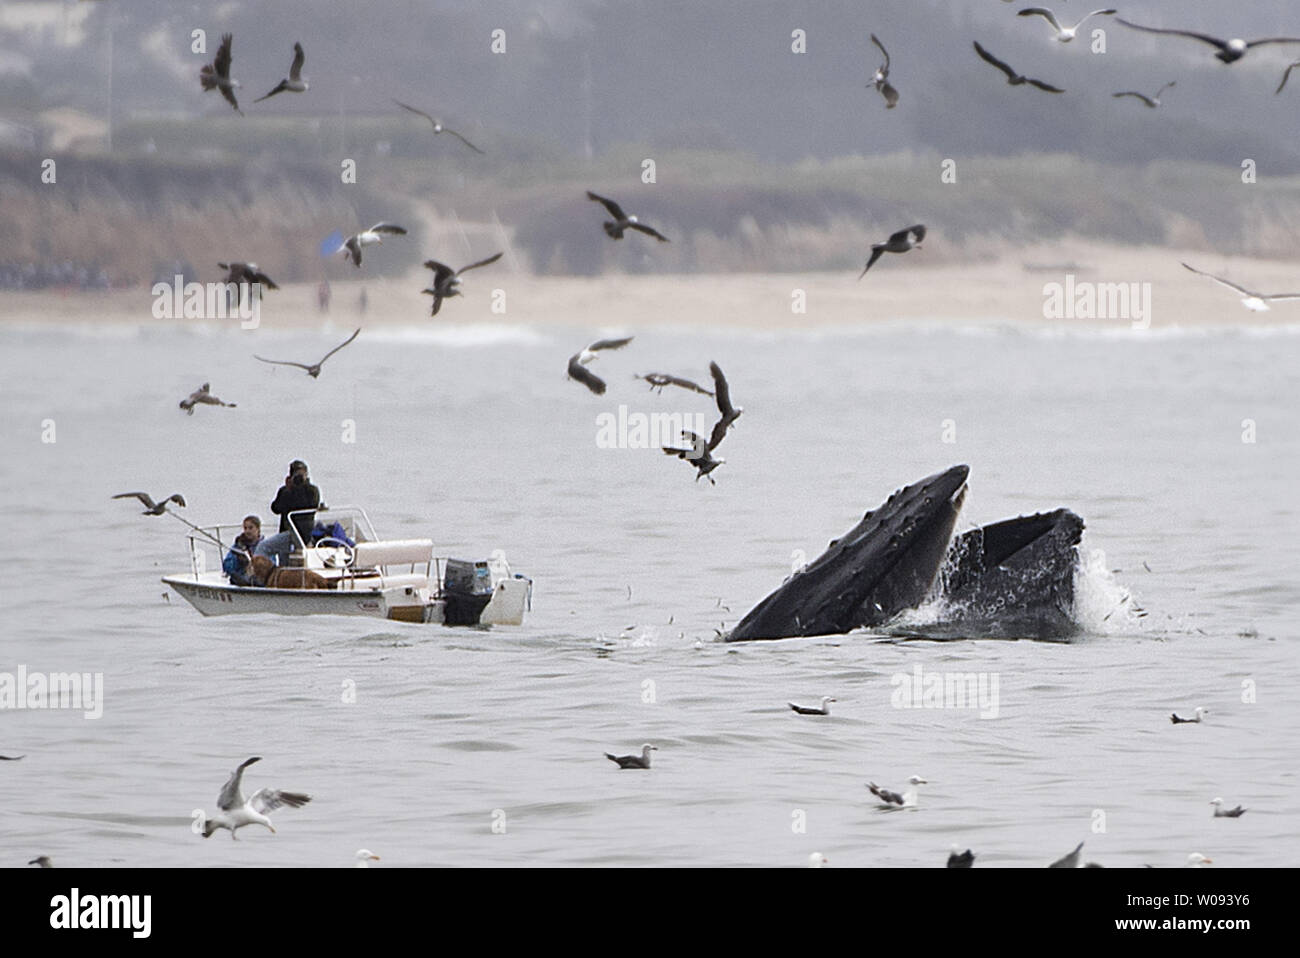 A whale gulps anchovies next to a fisherman in Half Moon Bay, California on July 6, 2016. El Niño has brought abundant bait, flocks of birds, whales and tourists to Northern California beaches.   Photo by Terry Schmitt/UPI Stock Photo